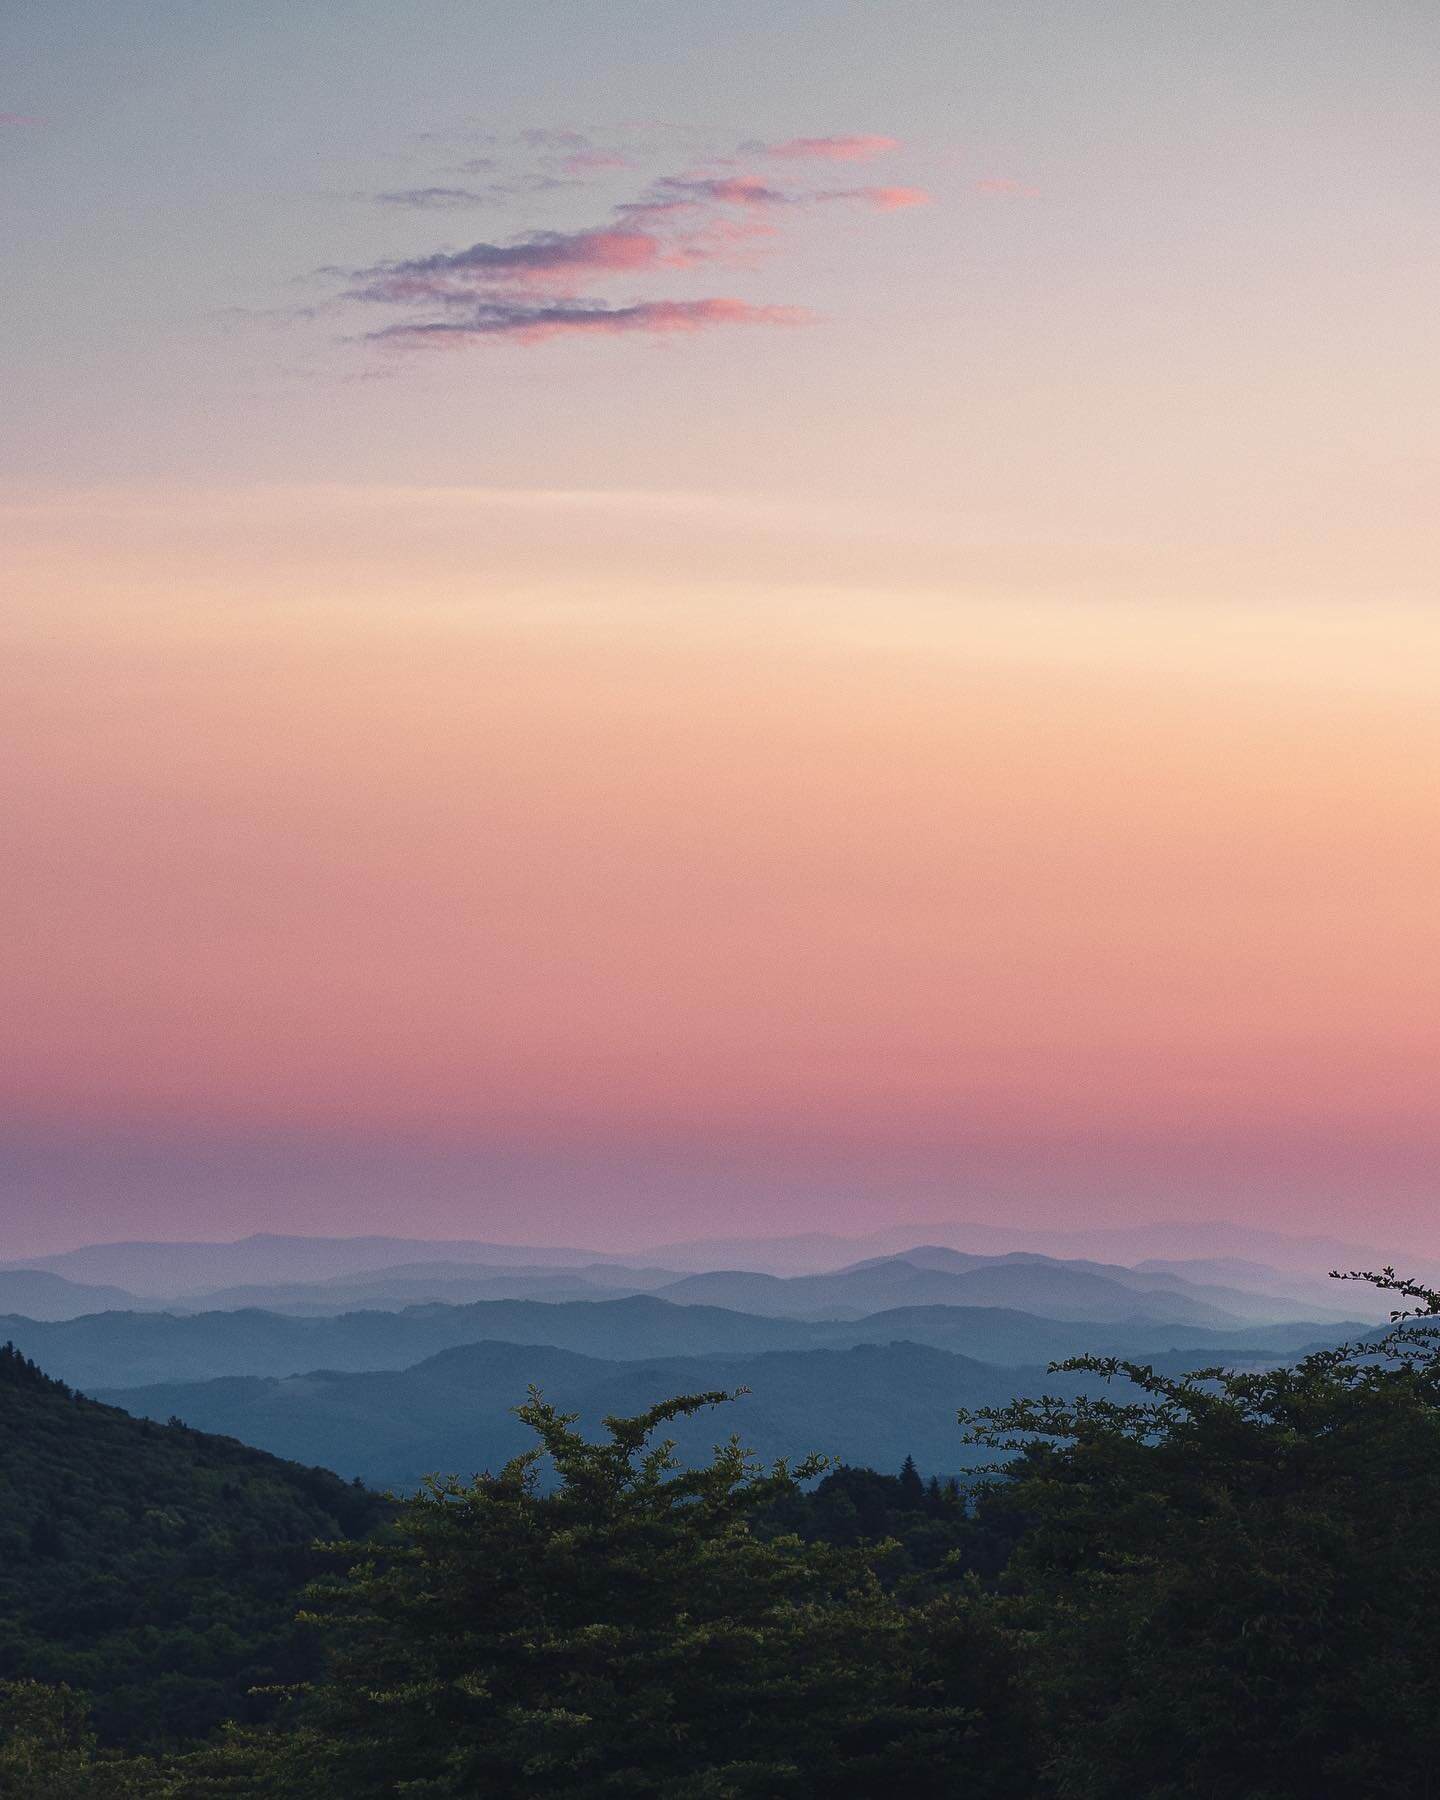 I&rsquo;ve taken advantage of being in NC this summer by going on A LOT of backpacking trips. Take a look at this sunset and you&rsquo;ll know why 😍🏔🌄
.
.
#beautyinthemundane #creativehub #sonyshooter #middleofnowhere #alltrails #hikemore #getouta